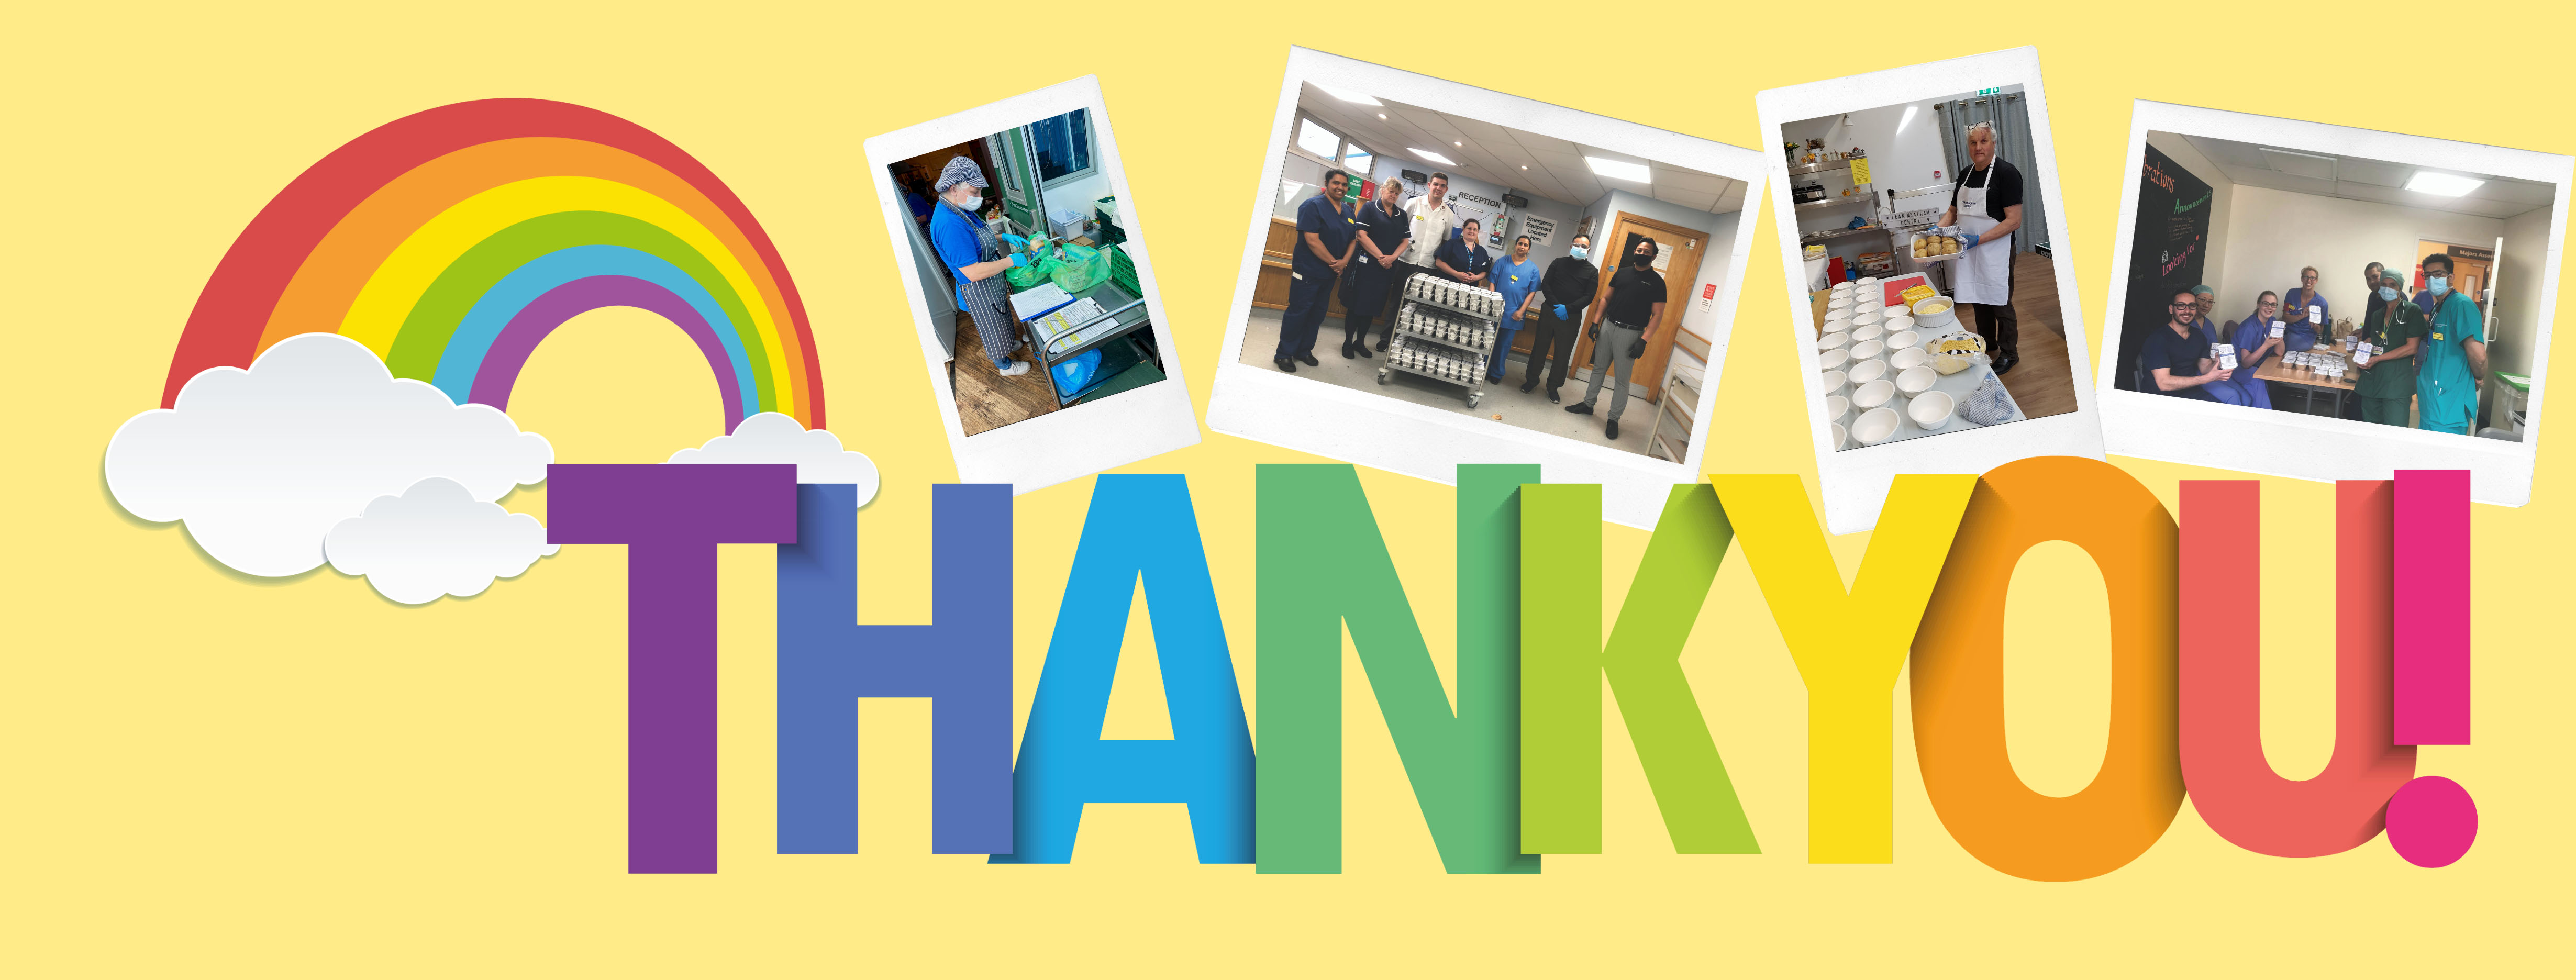 A thank you banner with images of volunteers and a rainbow